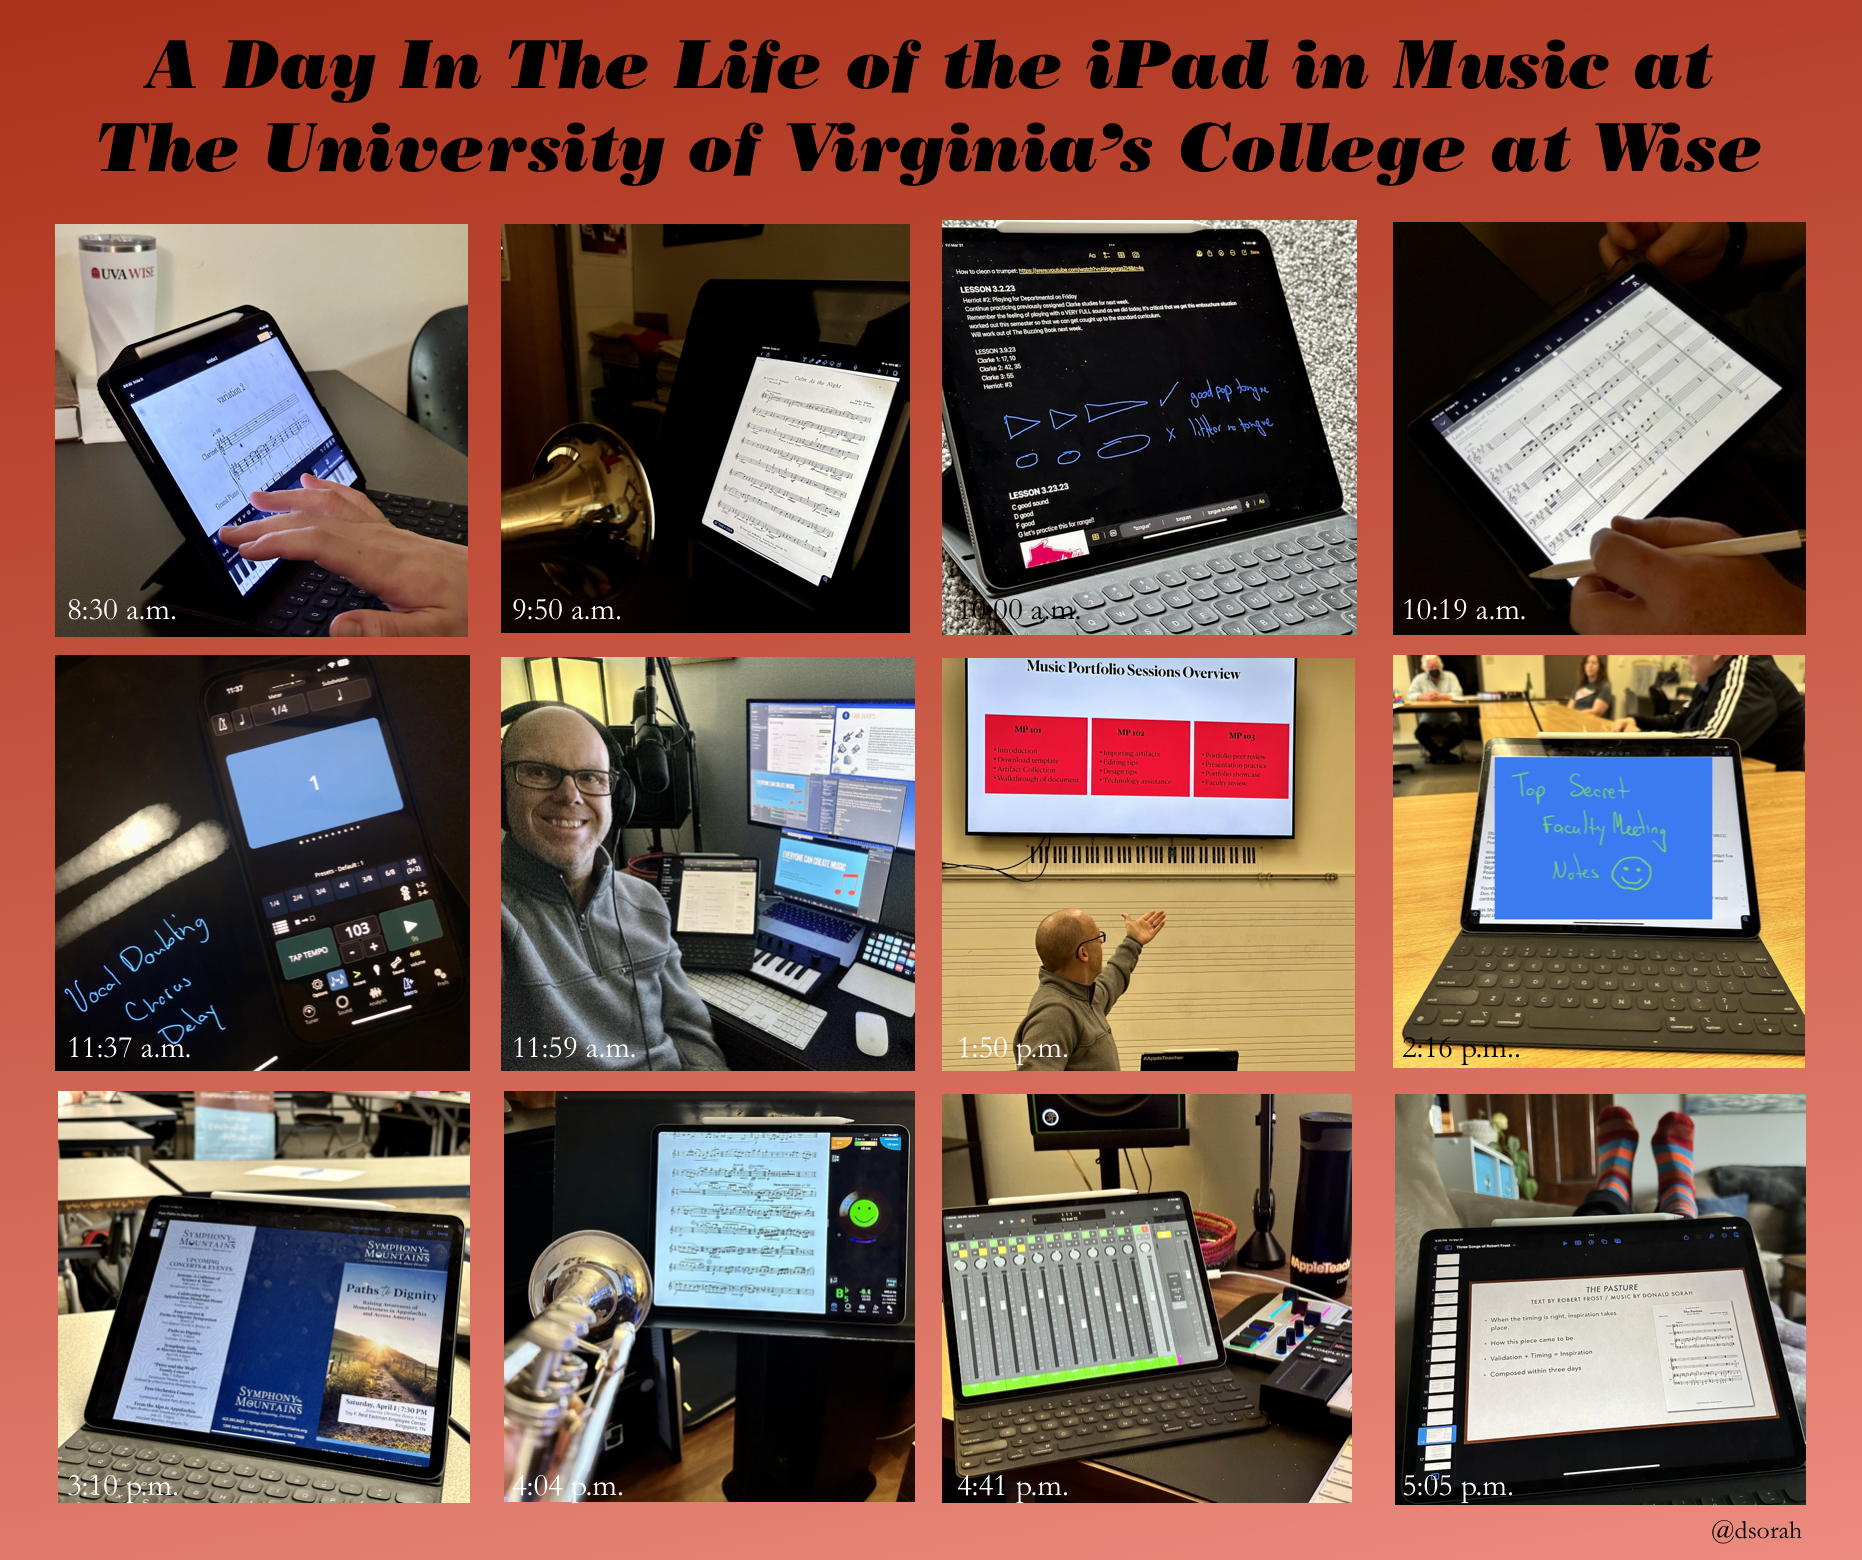 A collection of 12 images demonstrating use of iPad in the music program at The University of Virginia’s College at Wise. 